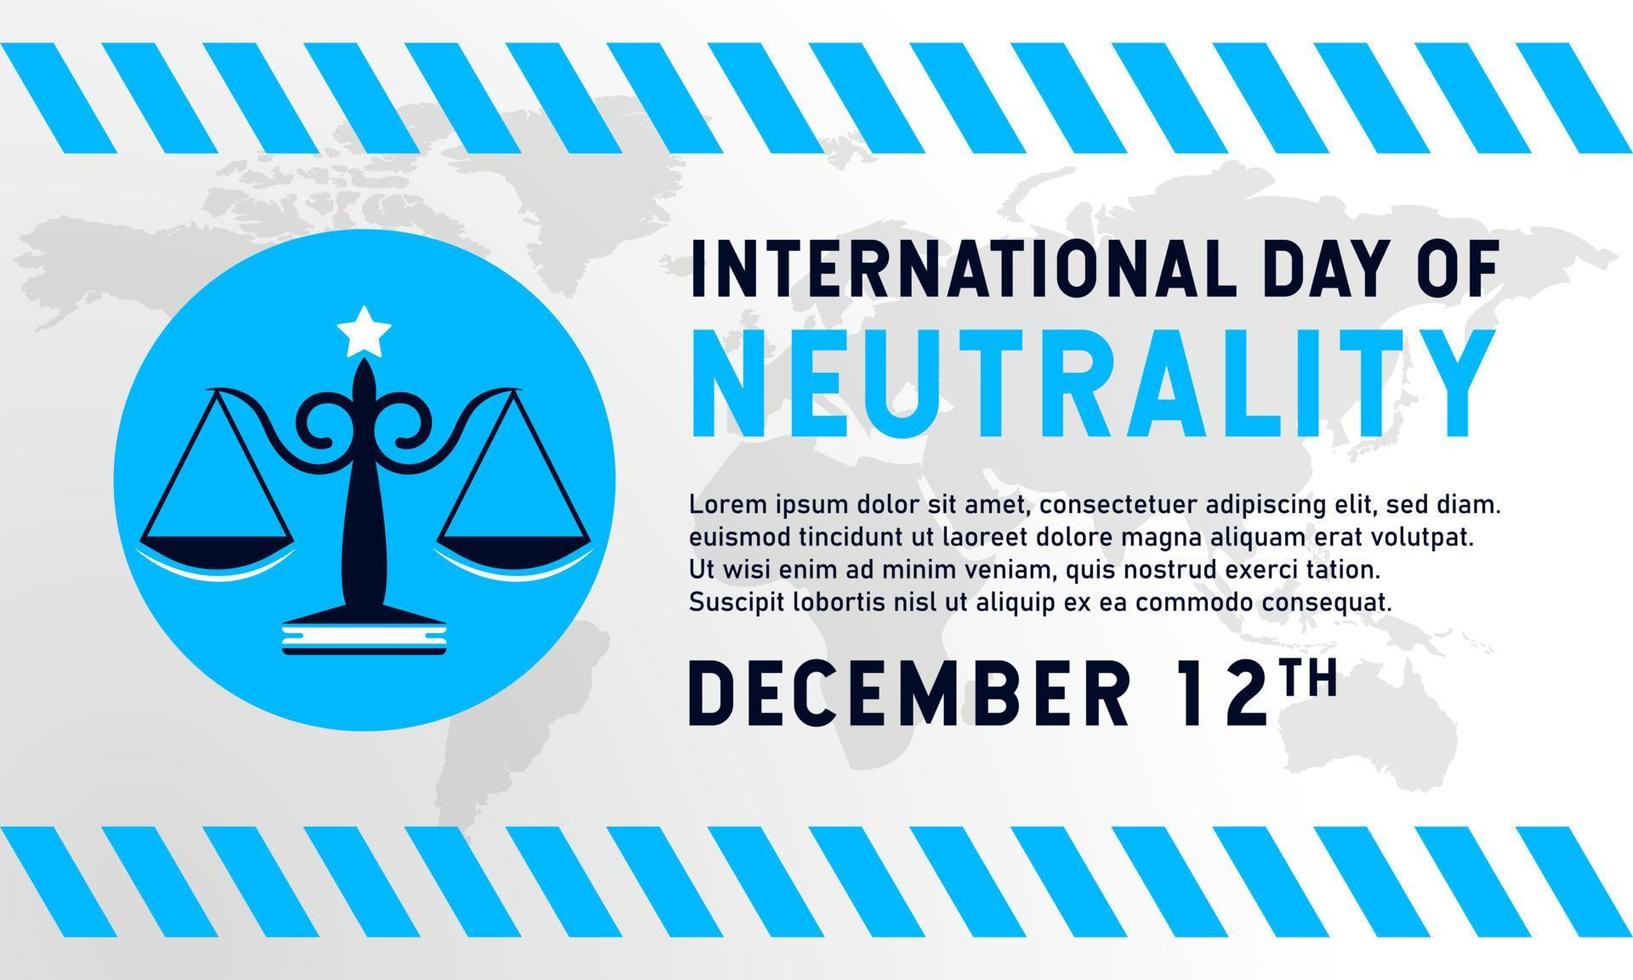 International Day of Neutrality Background.December 12. Template for banner, greeting card, or poster. With a weight scale law icon. Premium vector illustration